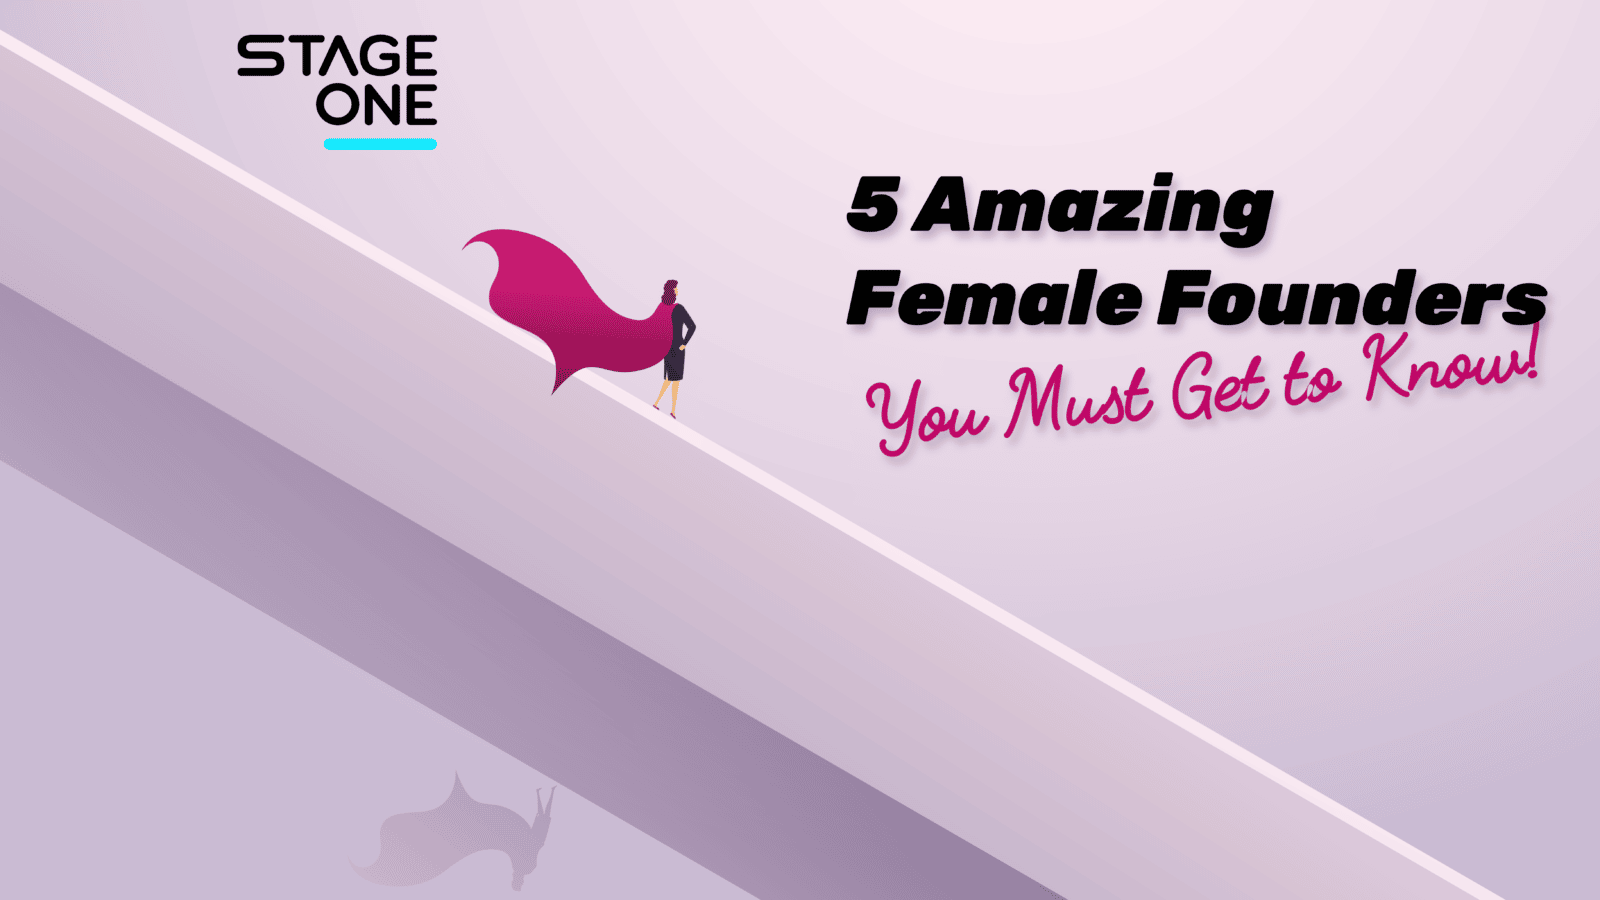 5 Amazing Female Founders You Must Get To Know!